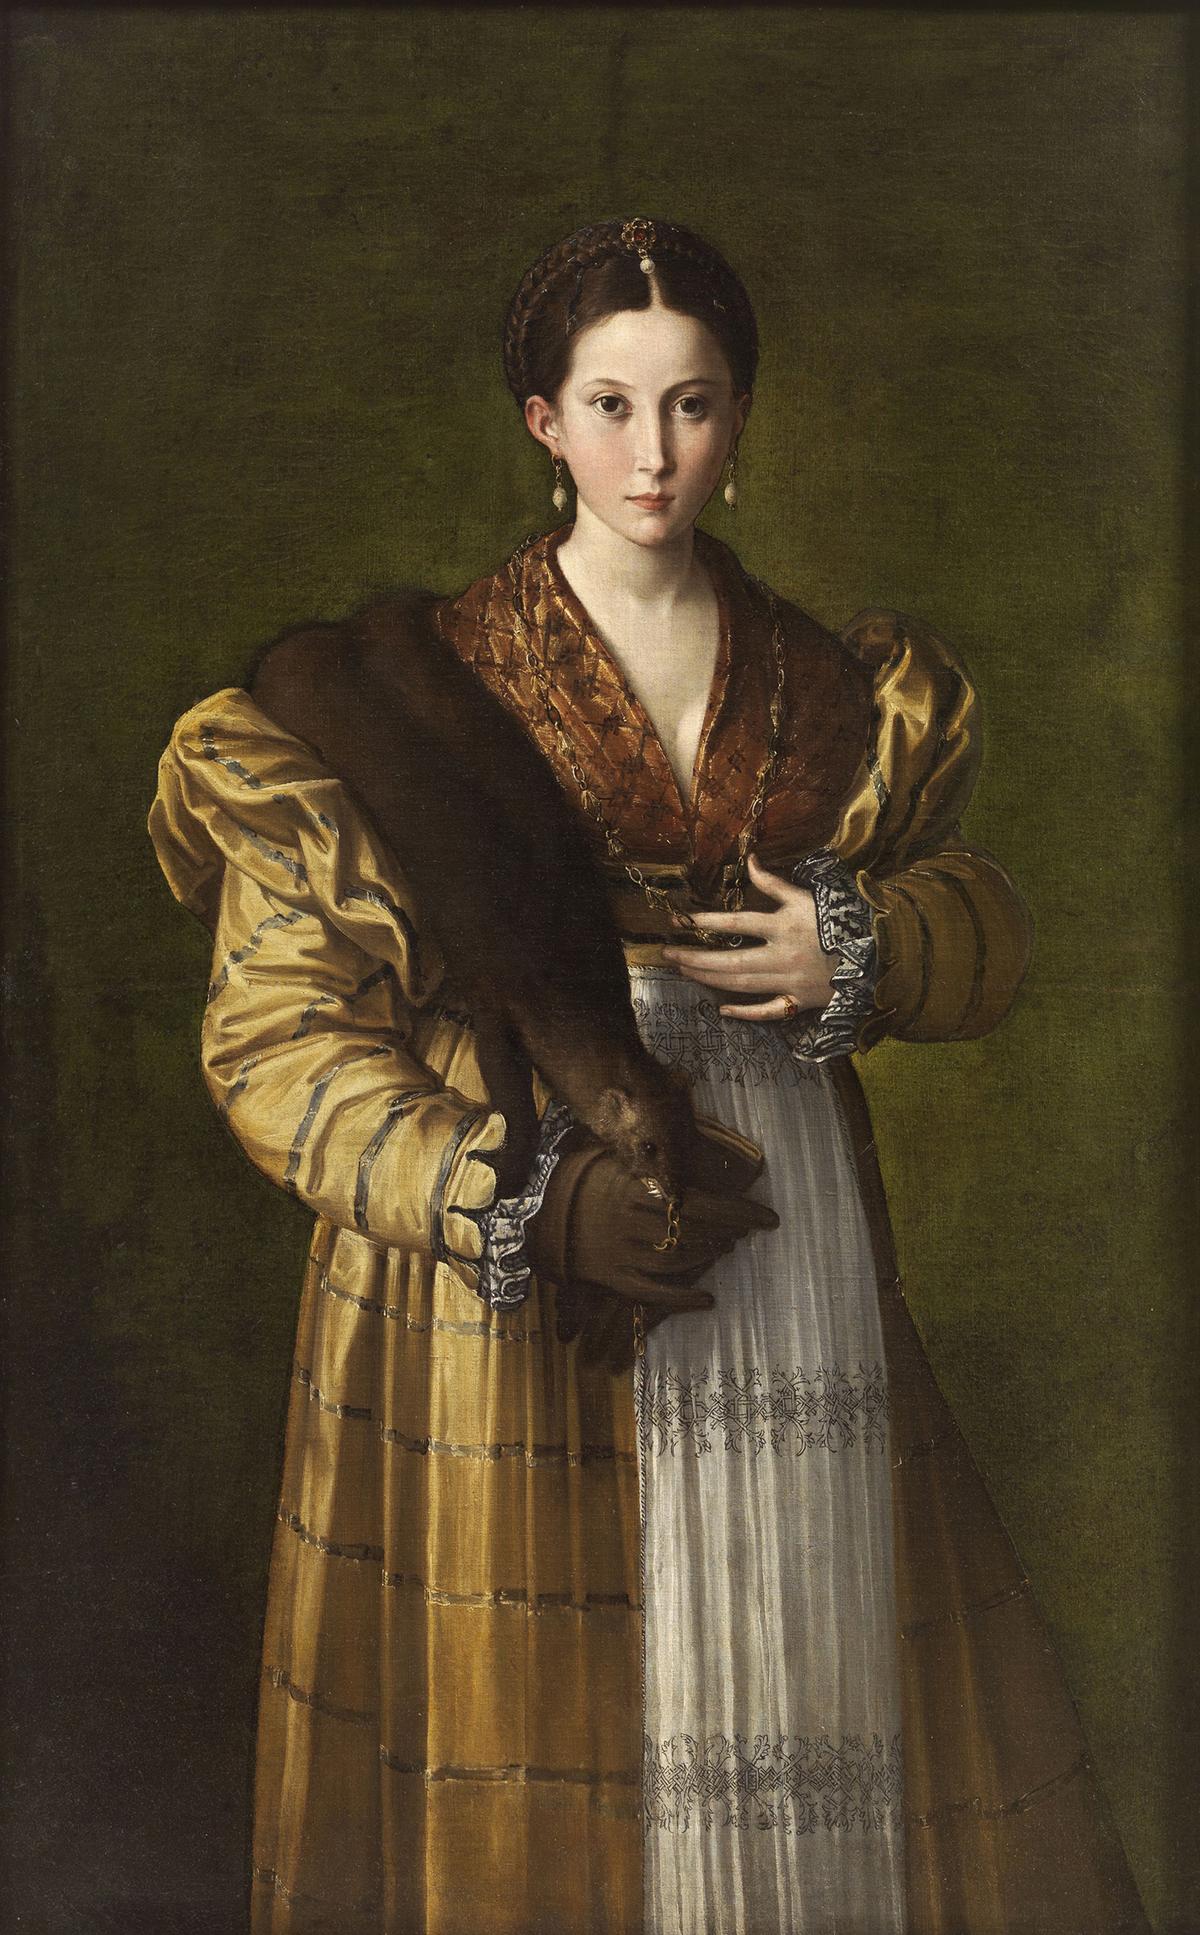 "Portrait of a Young Woman," (also known as "Antea"), circa 1535, by Parmigianino. Oil on canvas; 54.3 by 33.9 inches. (Courtesy of the Louvre)